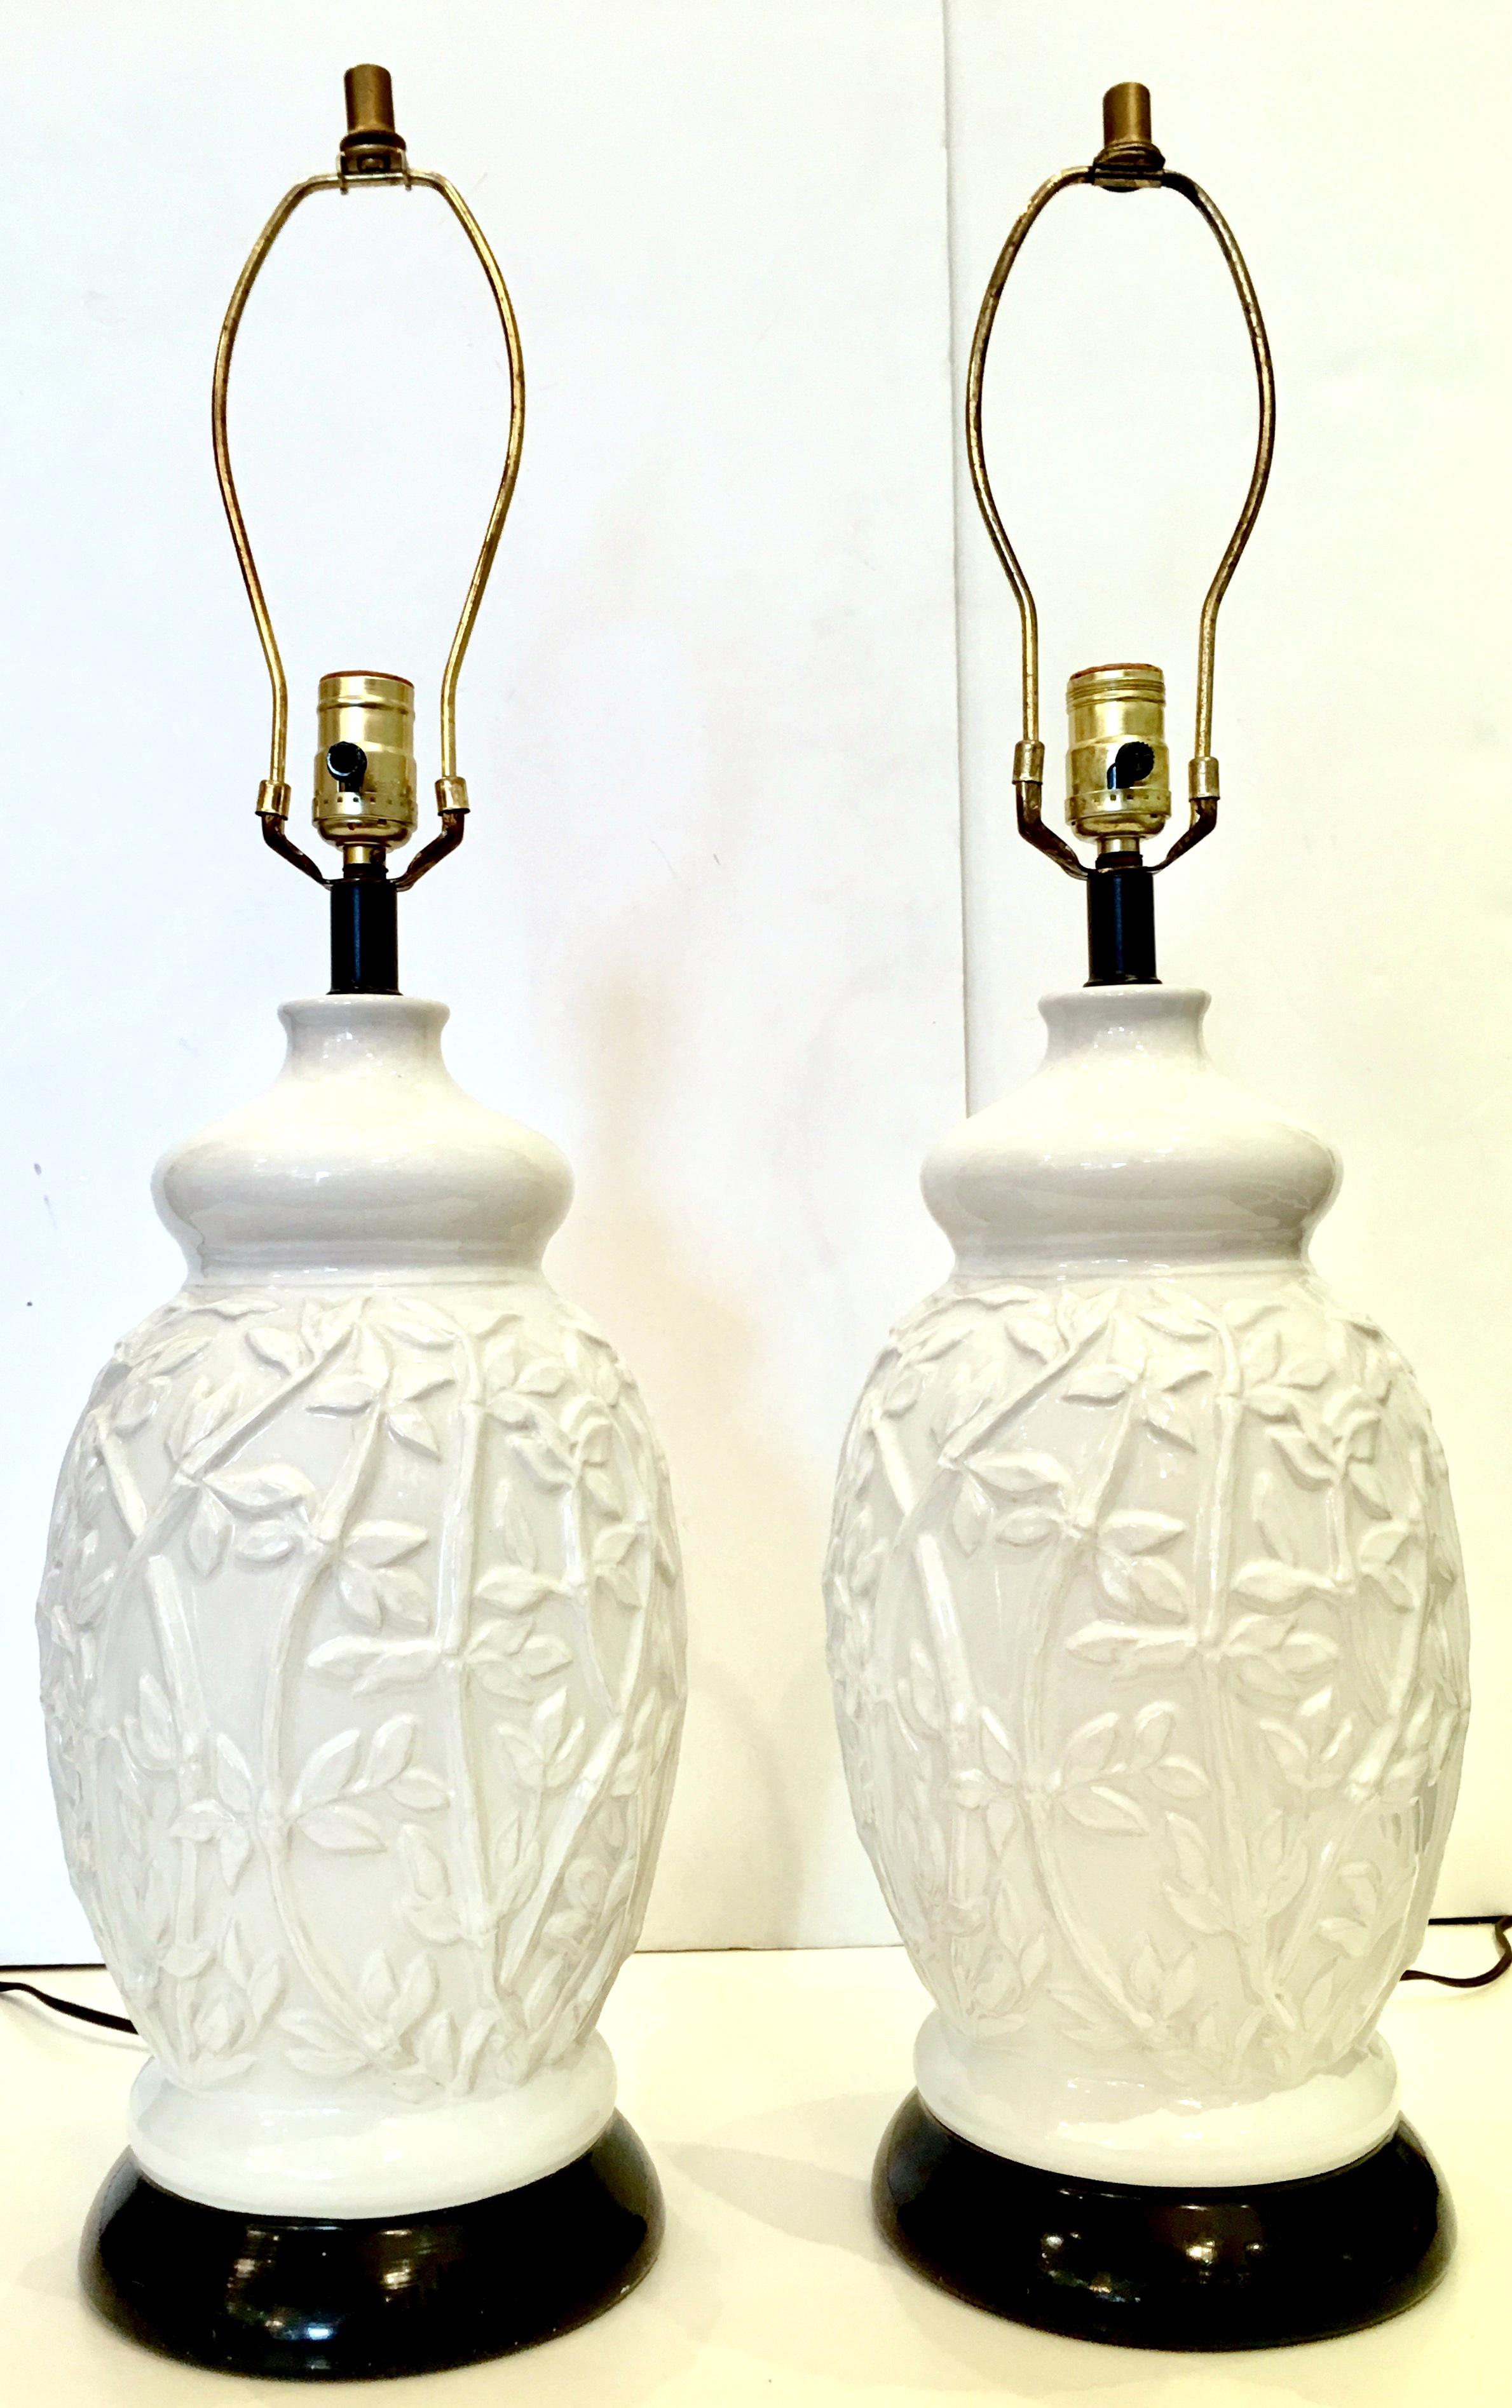 1960'S Hollywood Regency Pair of bright white large ceramic glaze ginger jar style high relief faux bamboo table lamps. Features a bright whit high relief faux bamboo motif with black ceramic base and original brass fittings. Includes a pair of